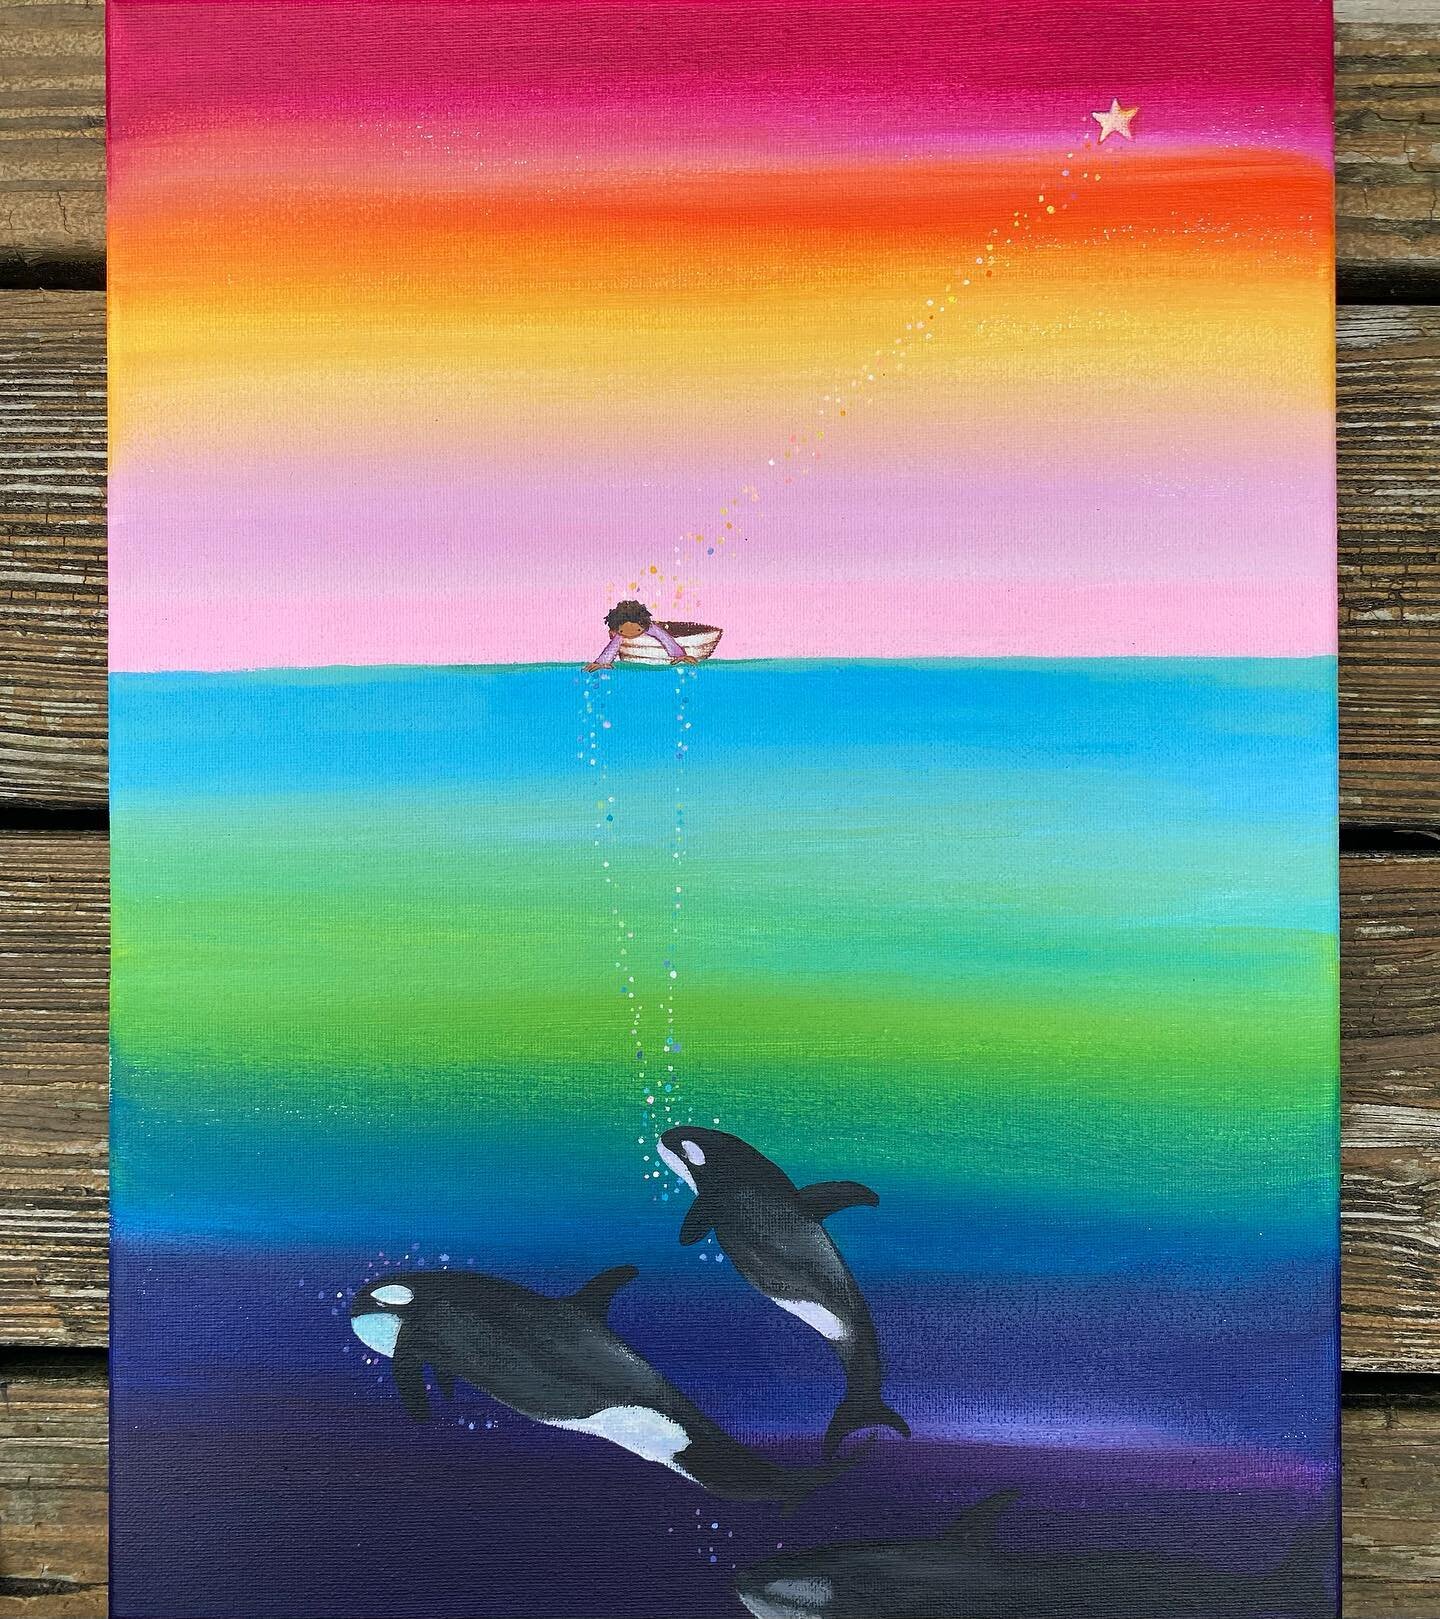 Couple of nights ago I dreamt of an orca and yesterday I painted them 💕
Acrylic on canvas 12x16&rdquo; 
&ldquo;As above so below&rdquo;

#orcas #acrylicpaintings #colorfulartwork #upliftingart